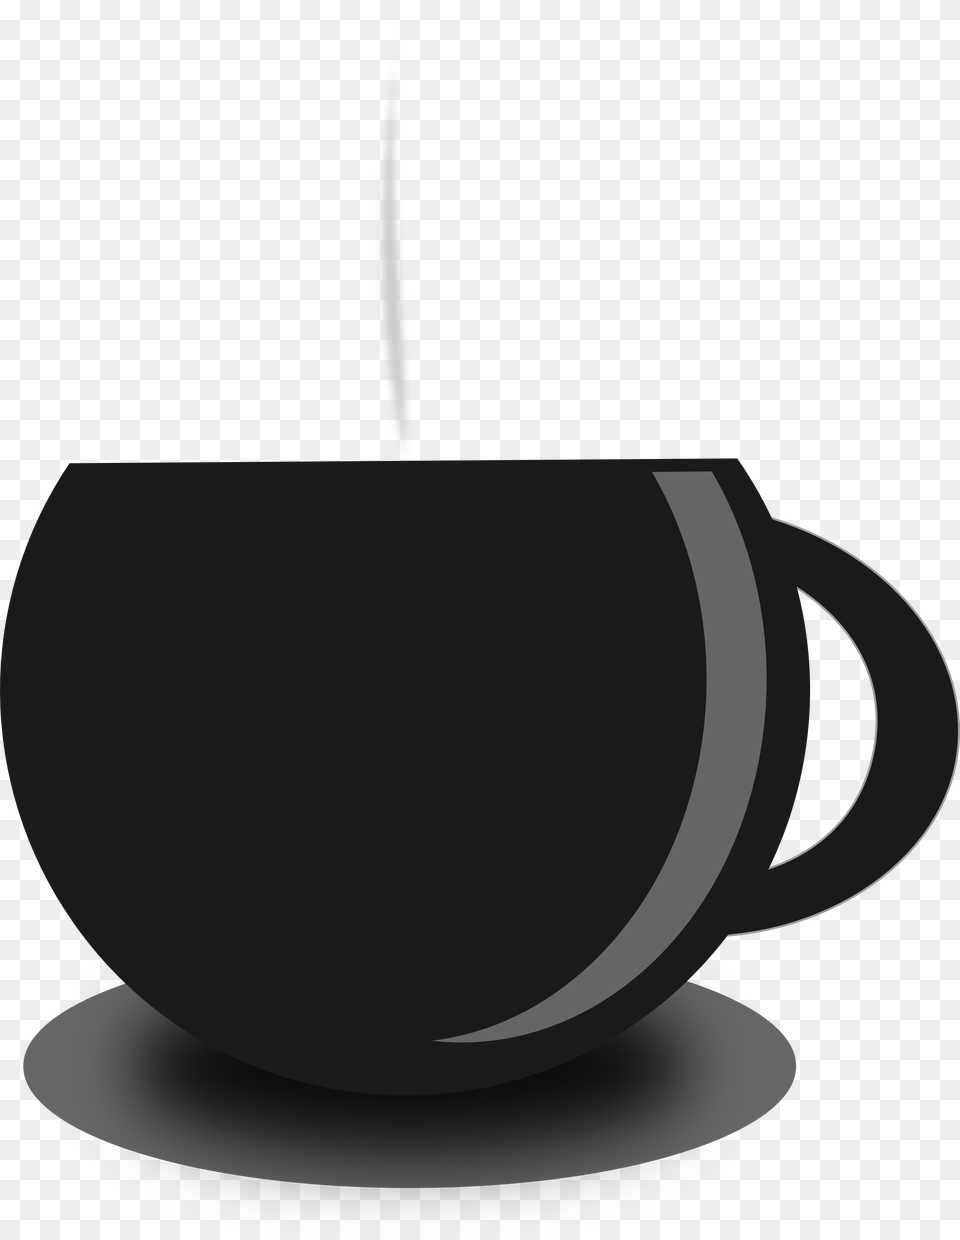 Black And White Clip Art Tea Cup Pigs Png Image